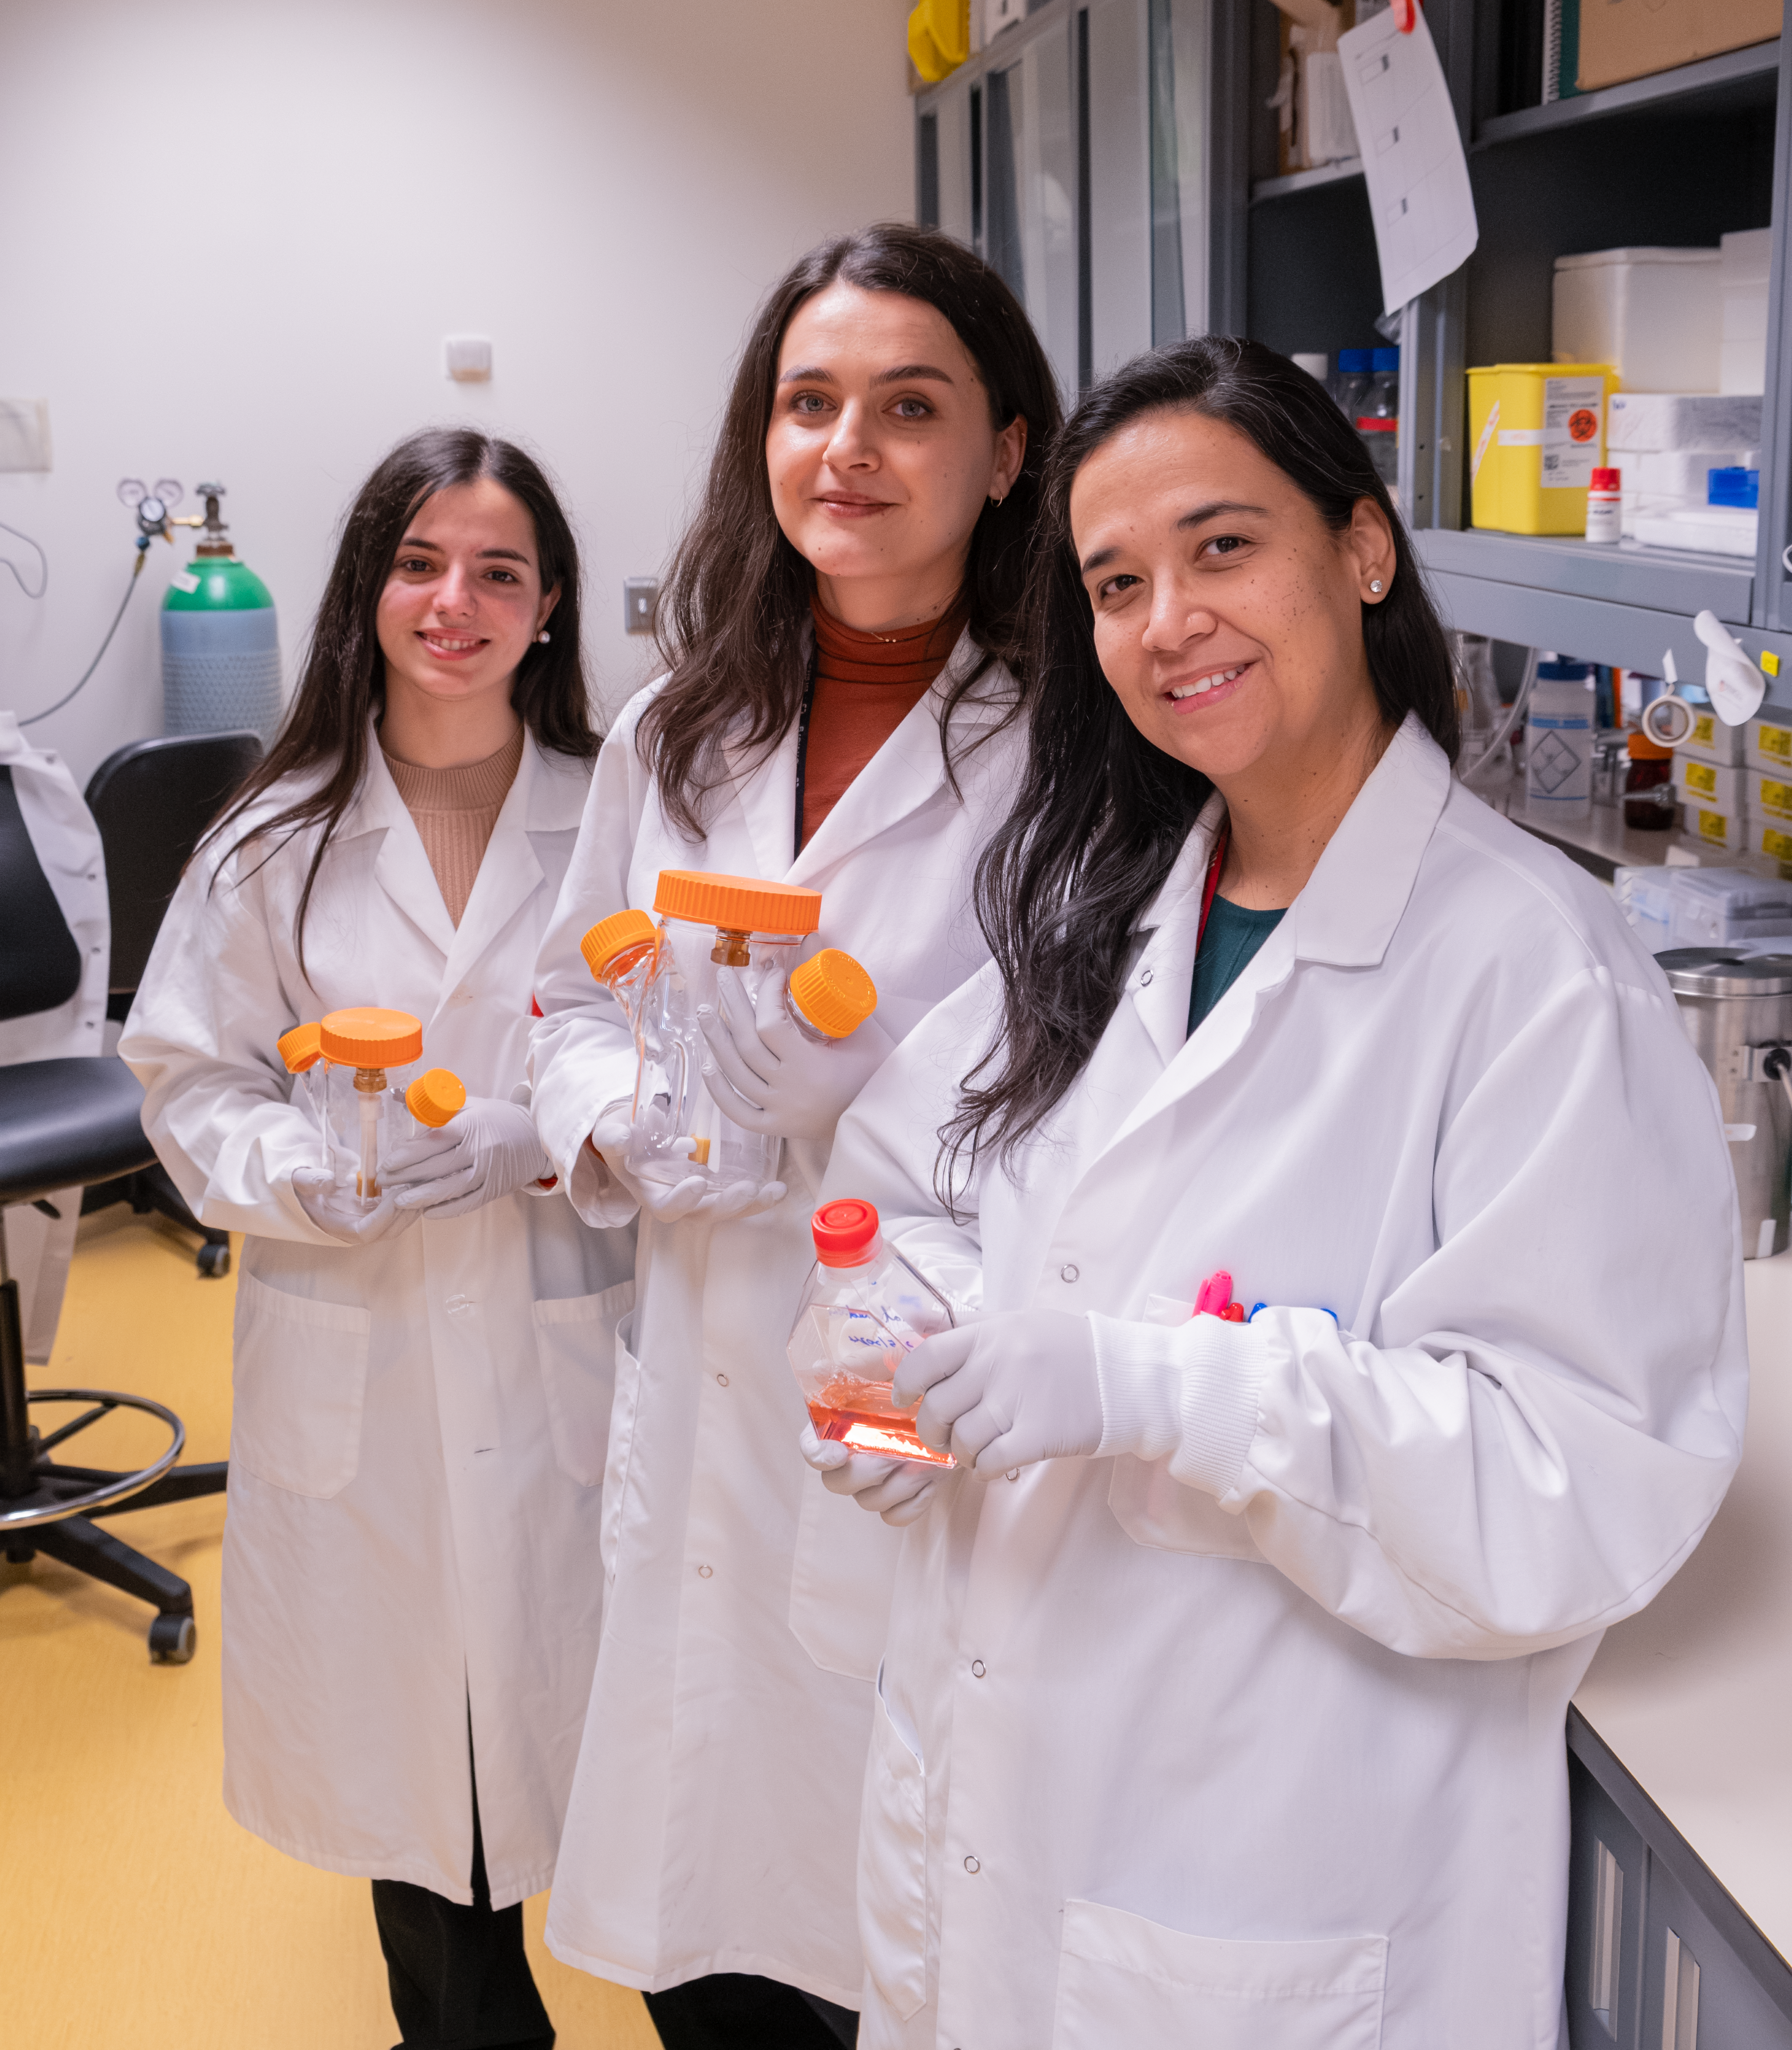 From left to right: Research Assistants María Belén Baeza Trallero and Paula Lépine and Research Associate Cecilia Rocha. 